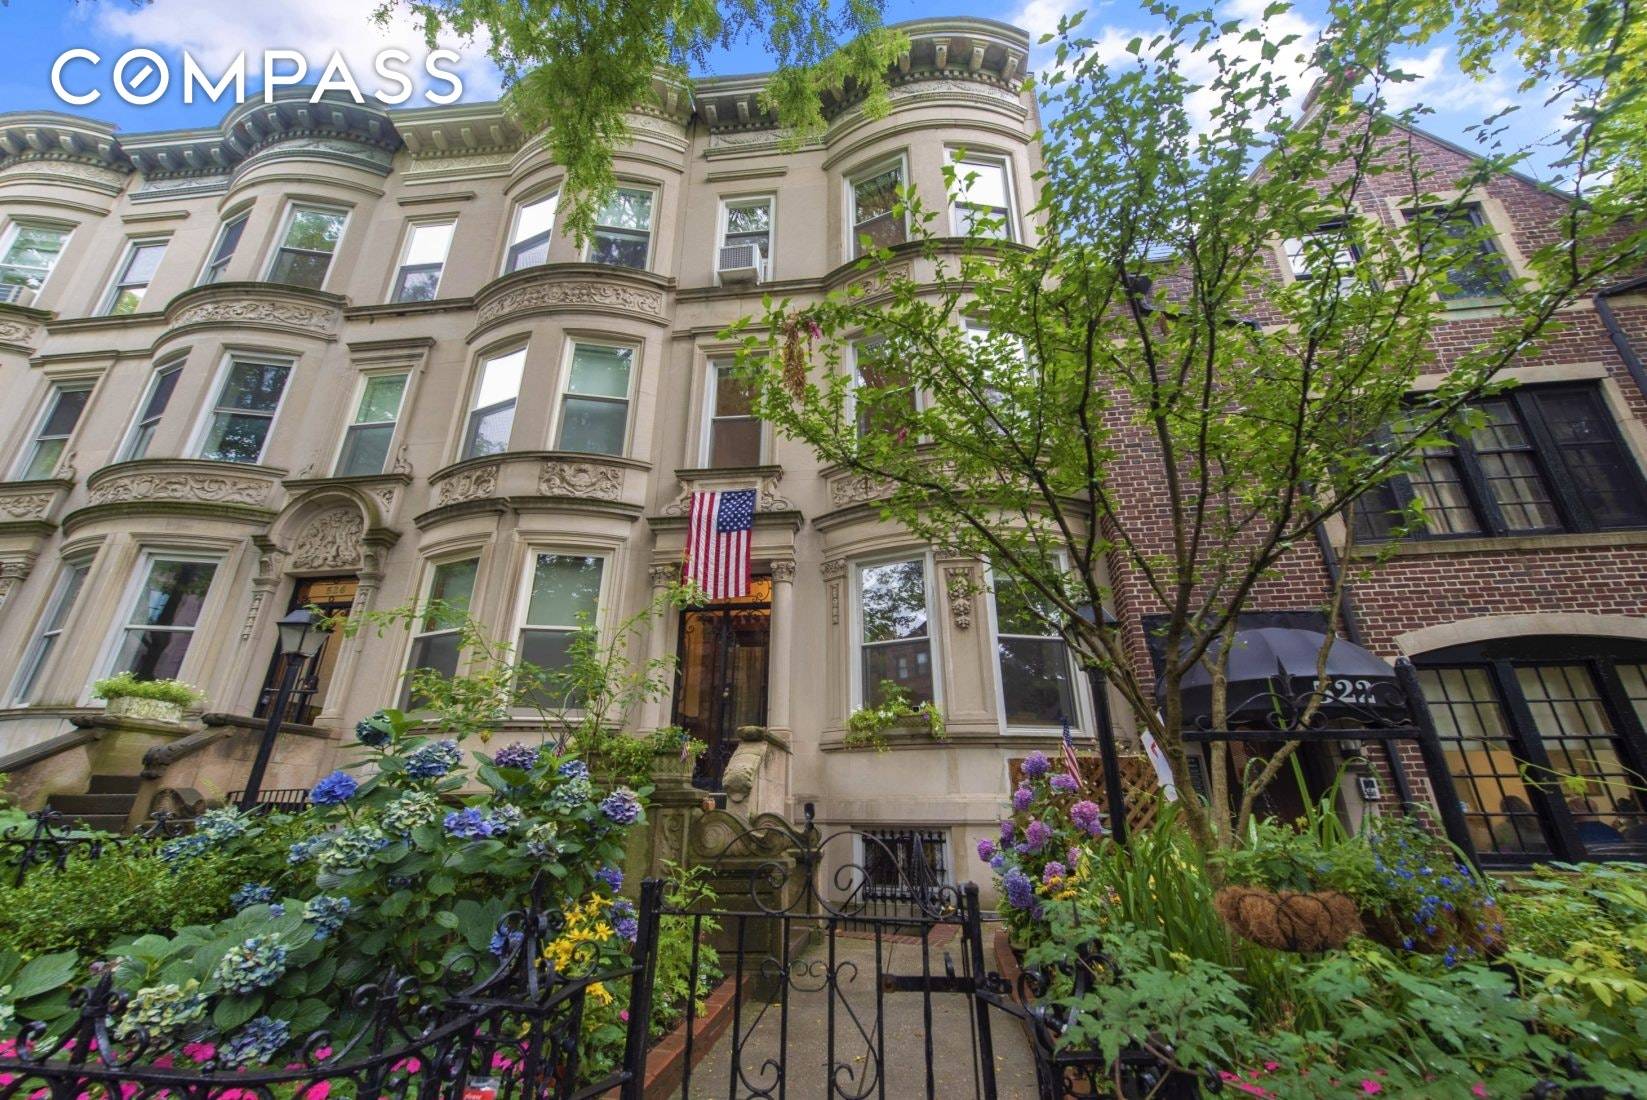 Here s a rare opportunity to own a historic three story Landmarked Park Slope townhouse on a coveted tree lined street.